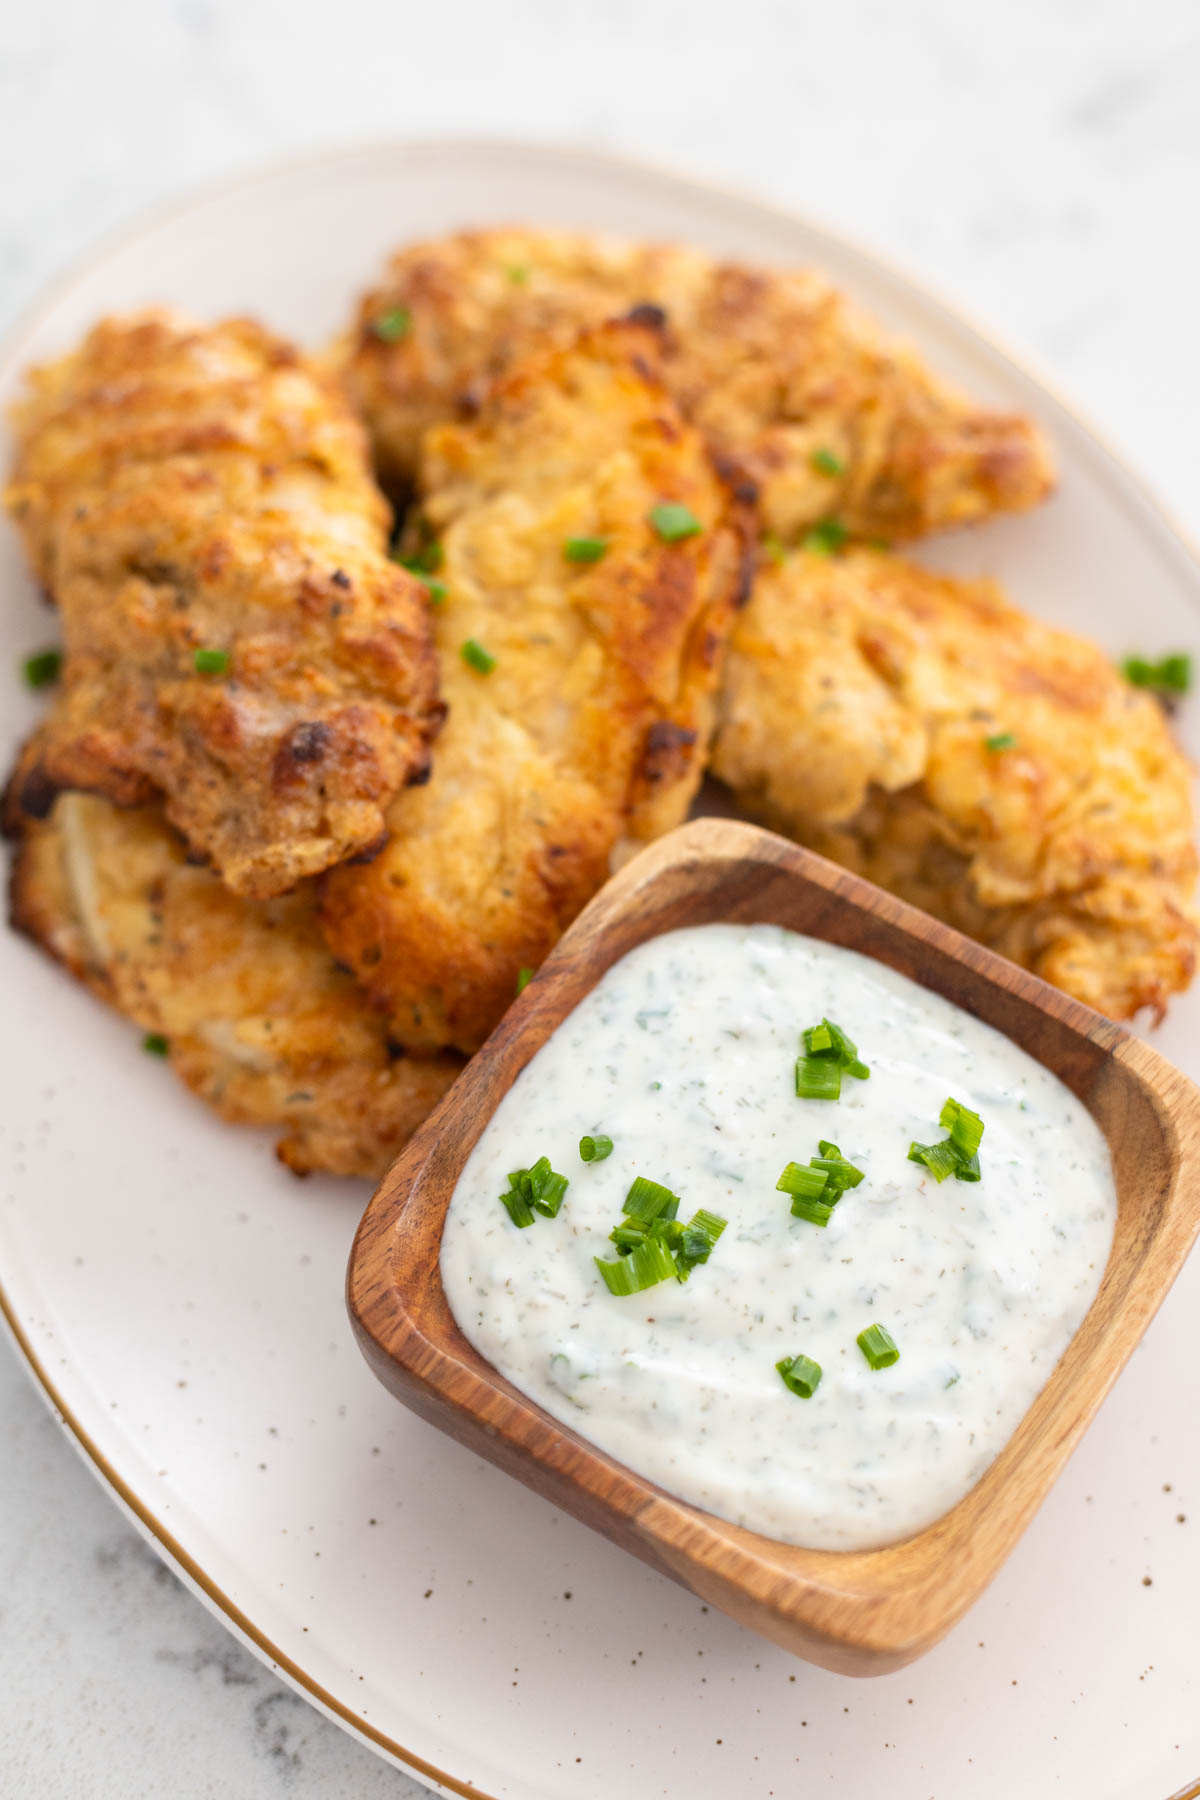 Chicken tenders are served on a platter with a cup of ranch dip.